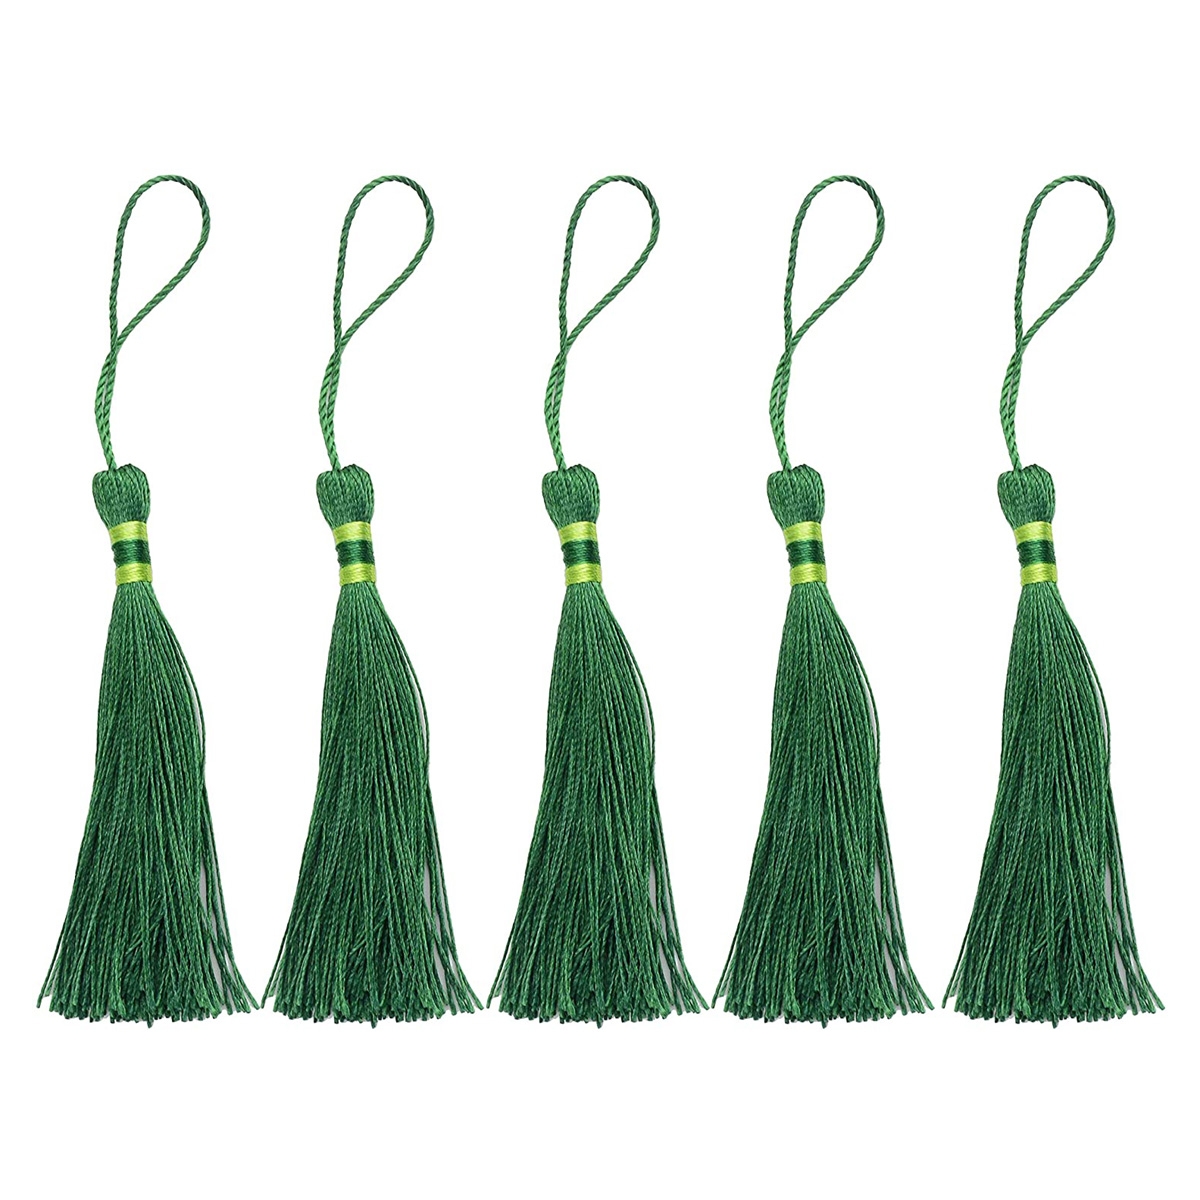 5.5 Inch Silky Floss Bookmark Tassels with Cord Loop and Small DIY Craft Accessory (Dark Green)